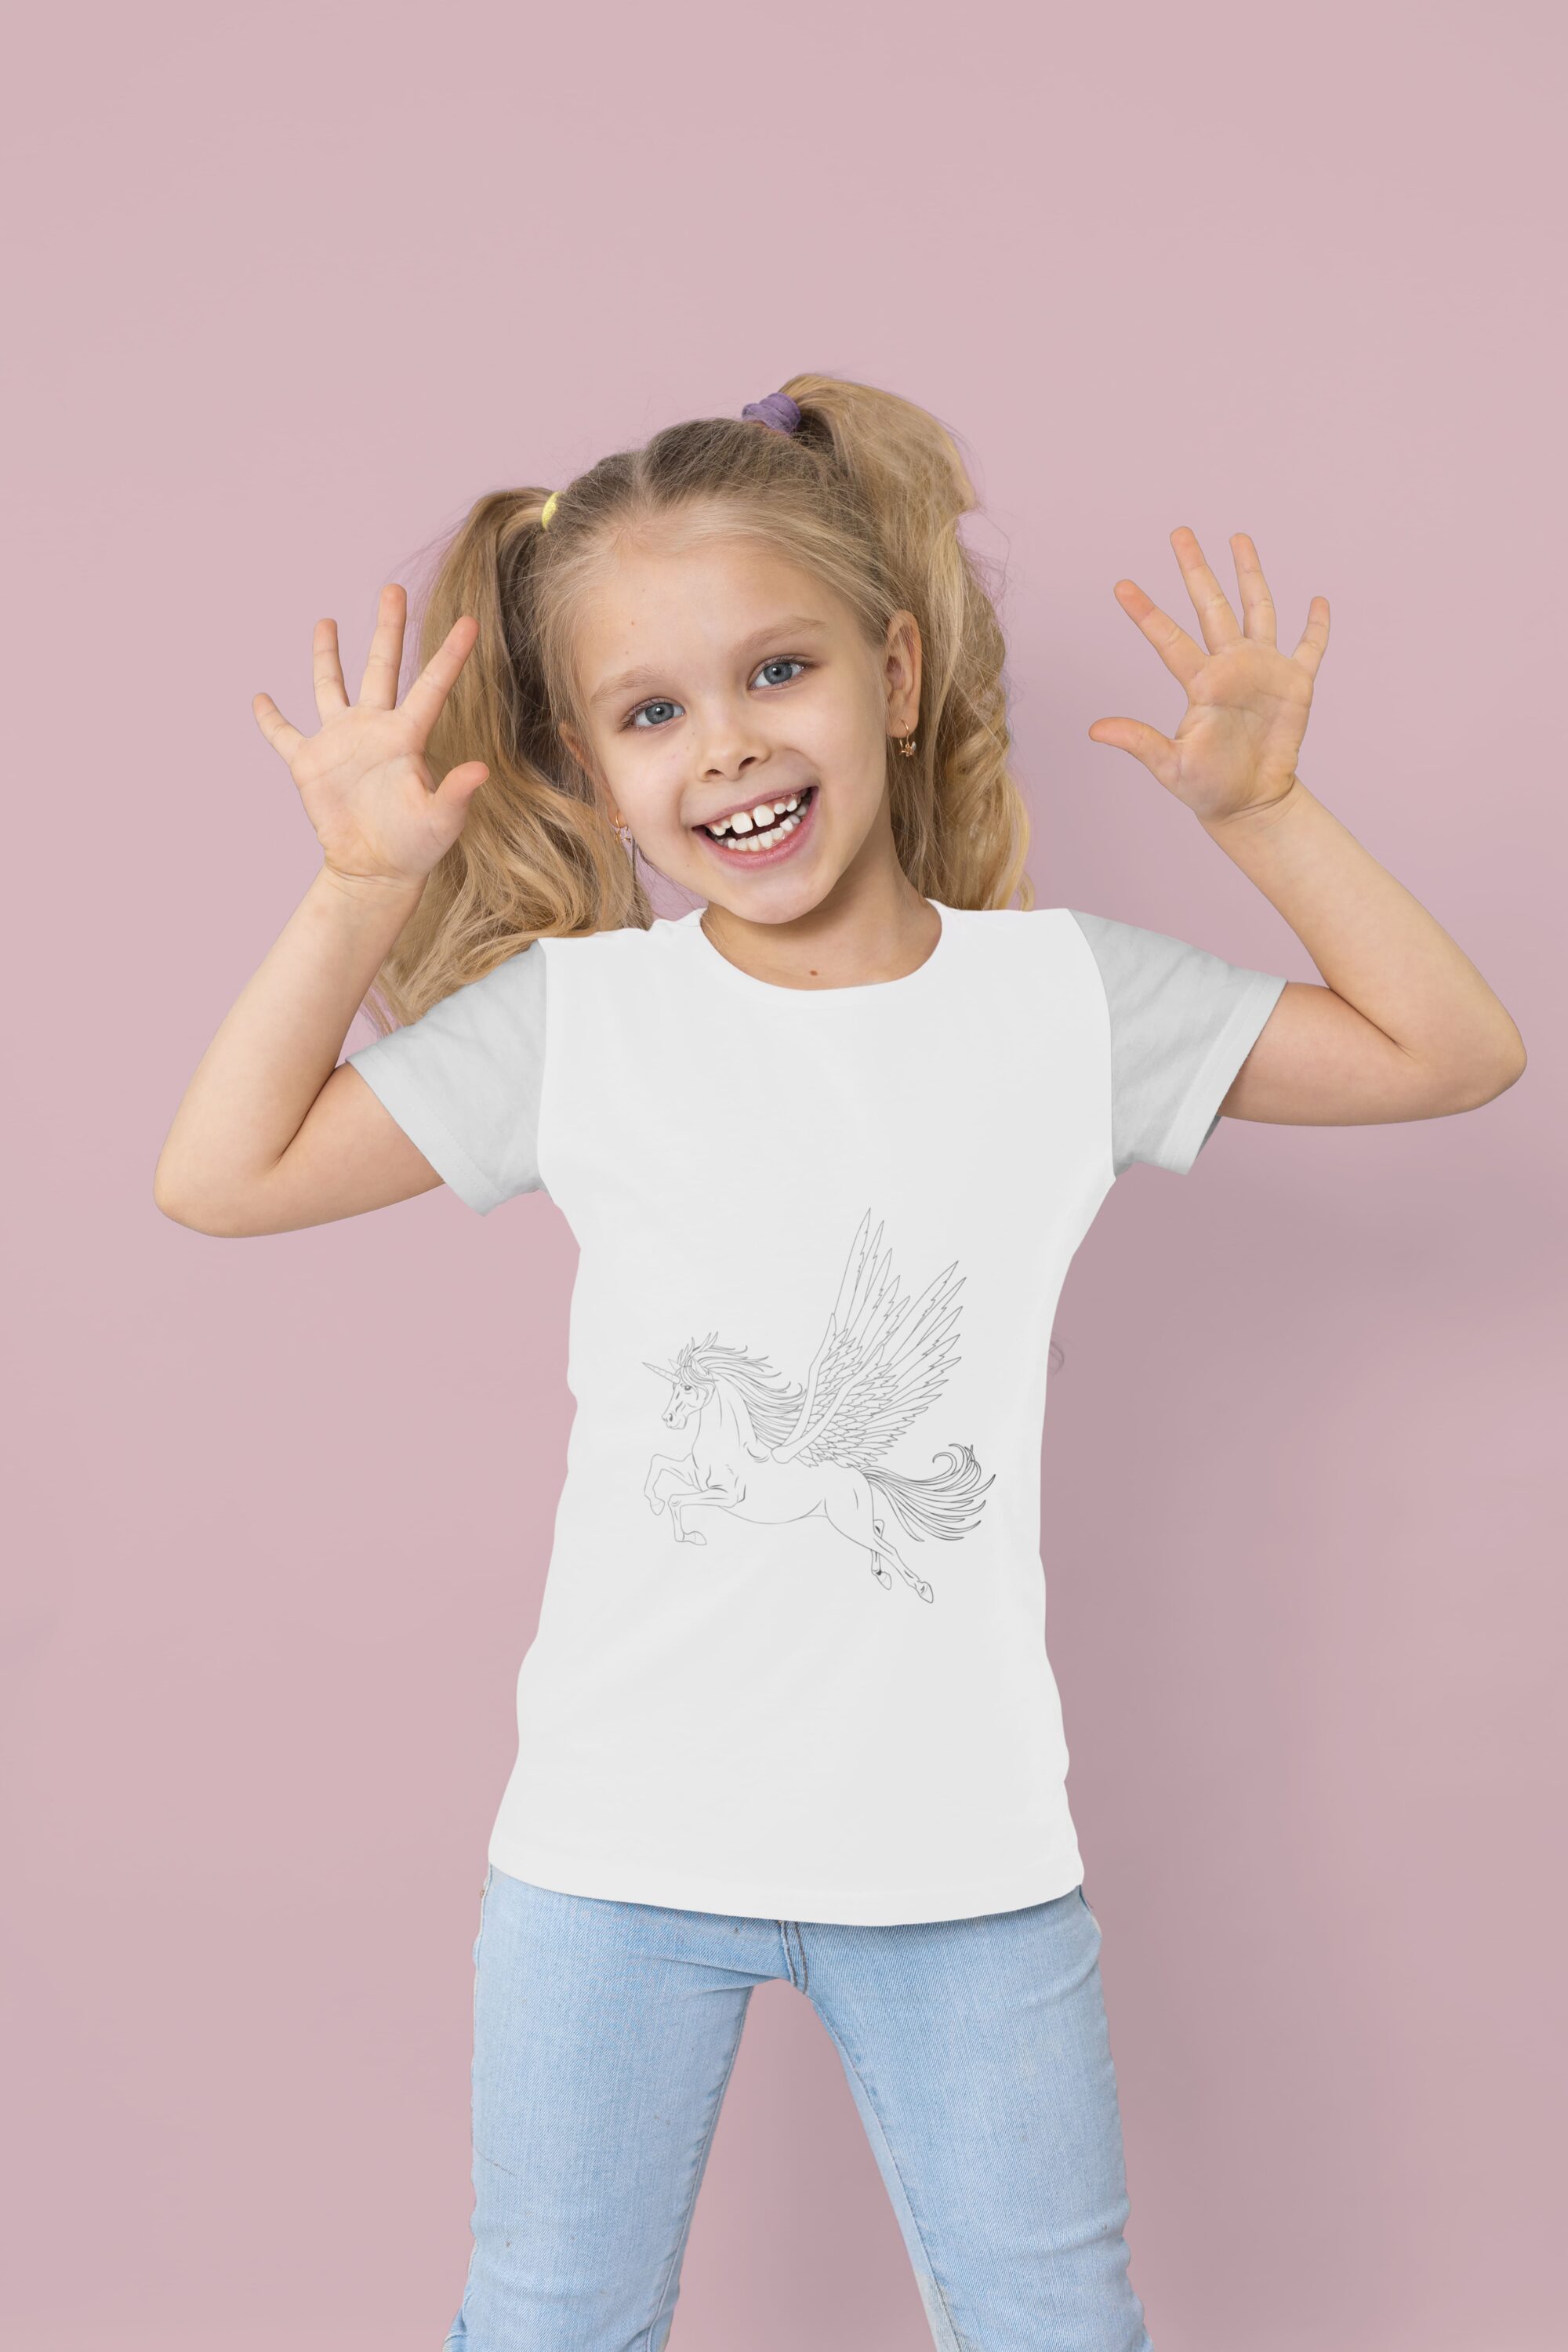 White t-shirt with gray sleeves and a gray flying unicorn, on a girl on a pink background.